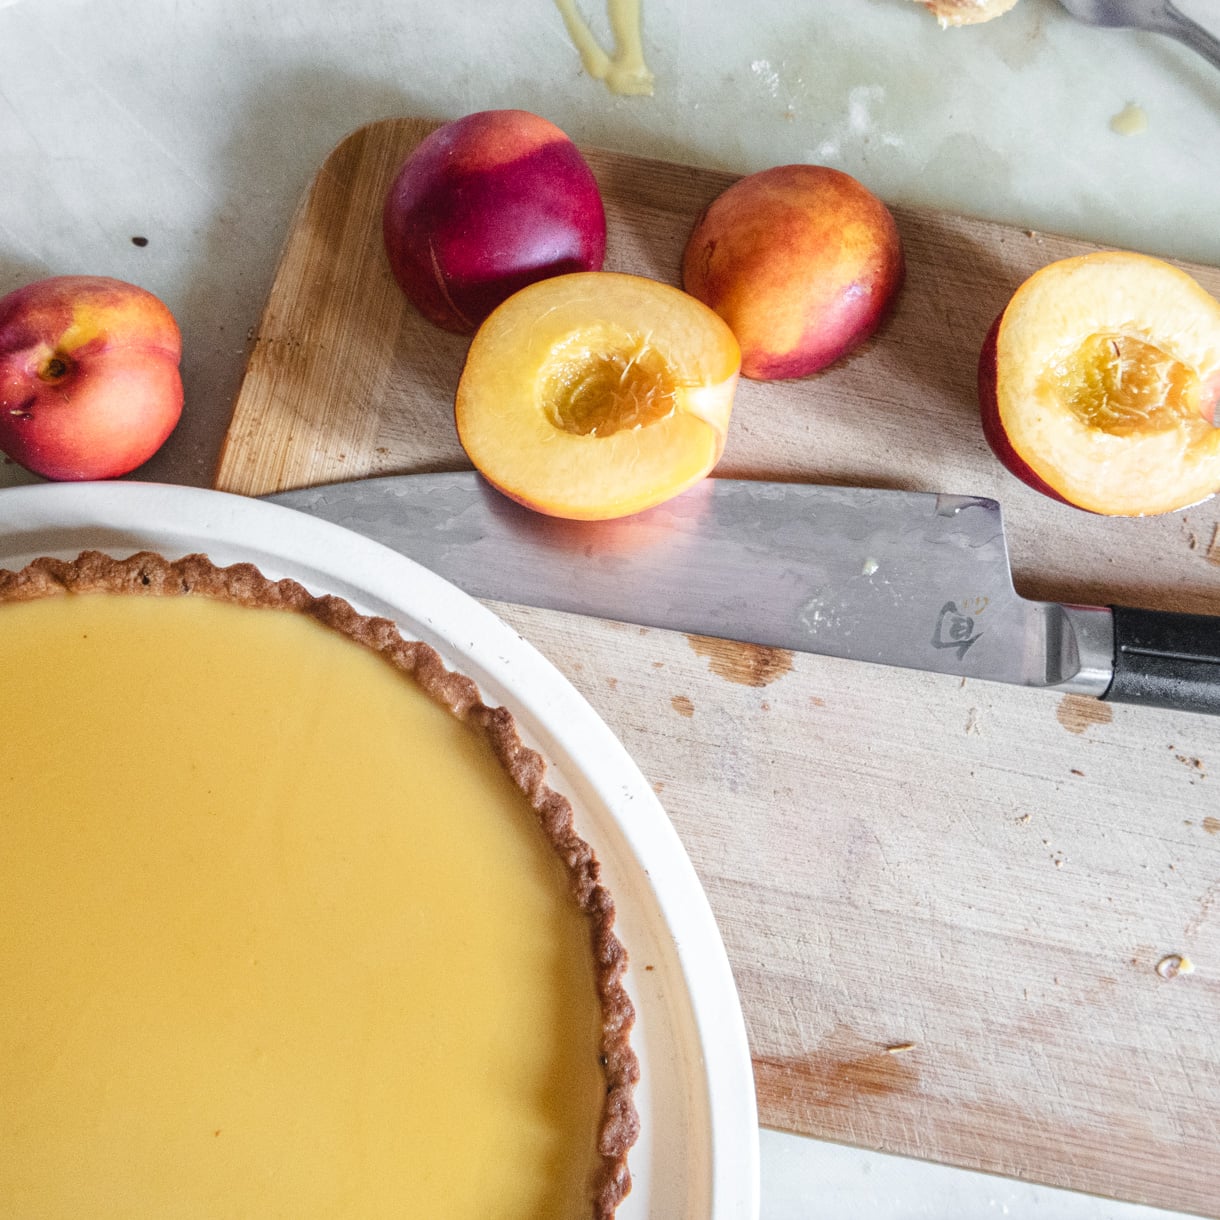 Fresh nectarines sliced in half over a cutting board with the pie in the foreground